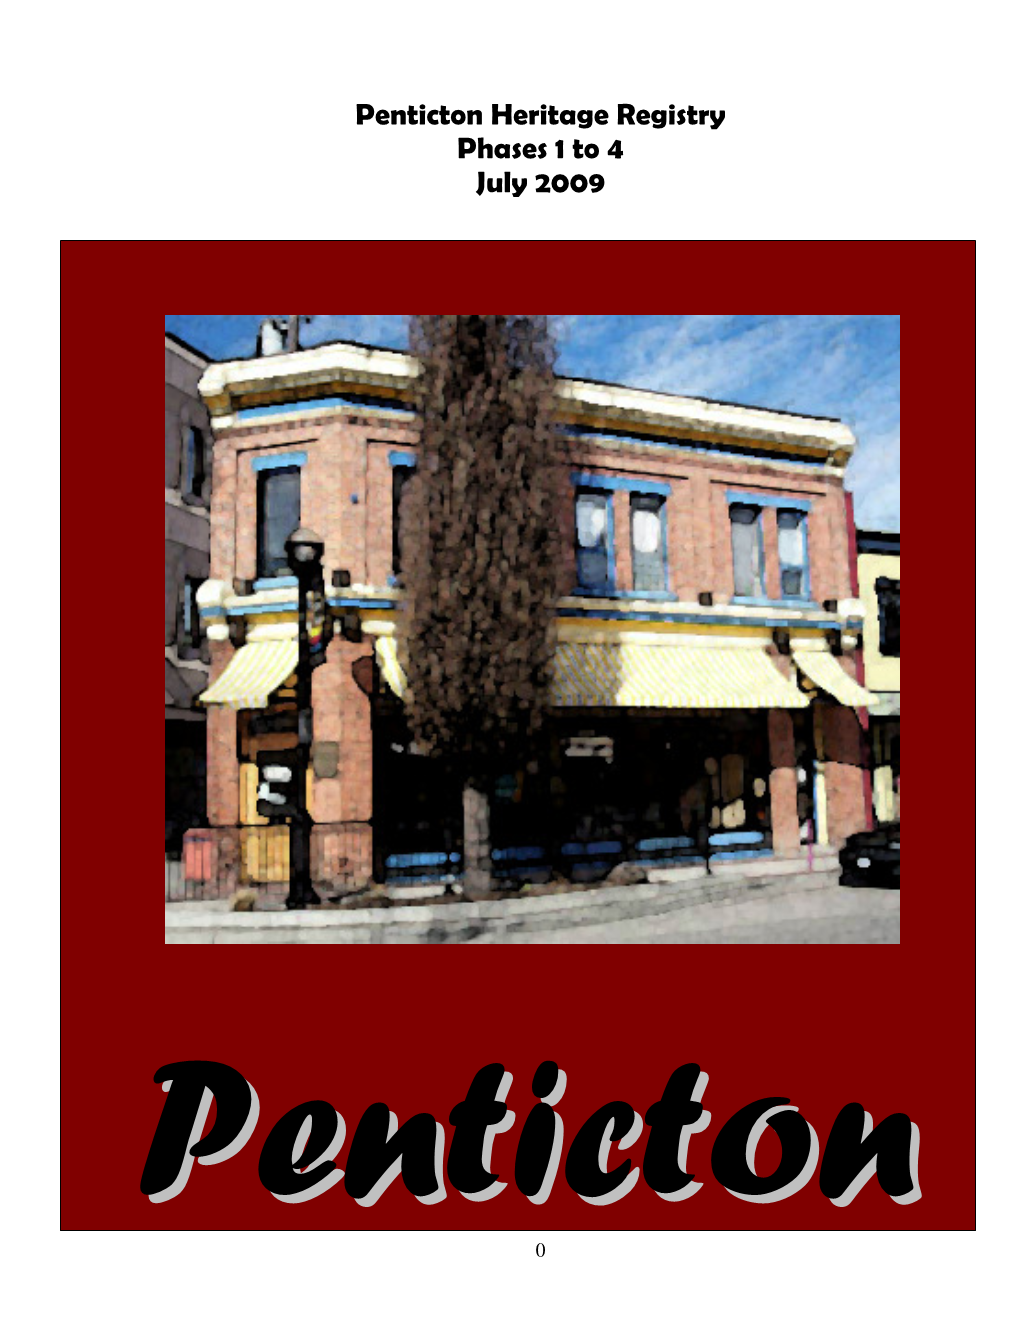 Penticton Heritage Registry Phases 1 to 4 July 2009